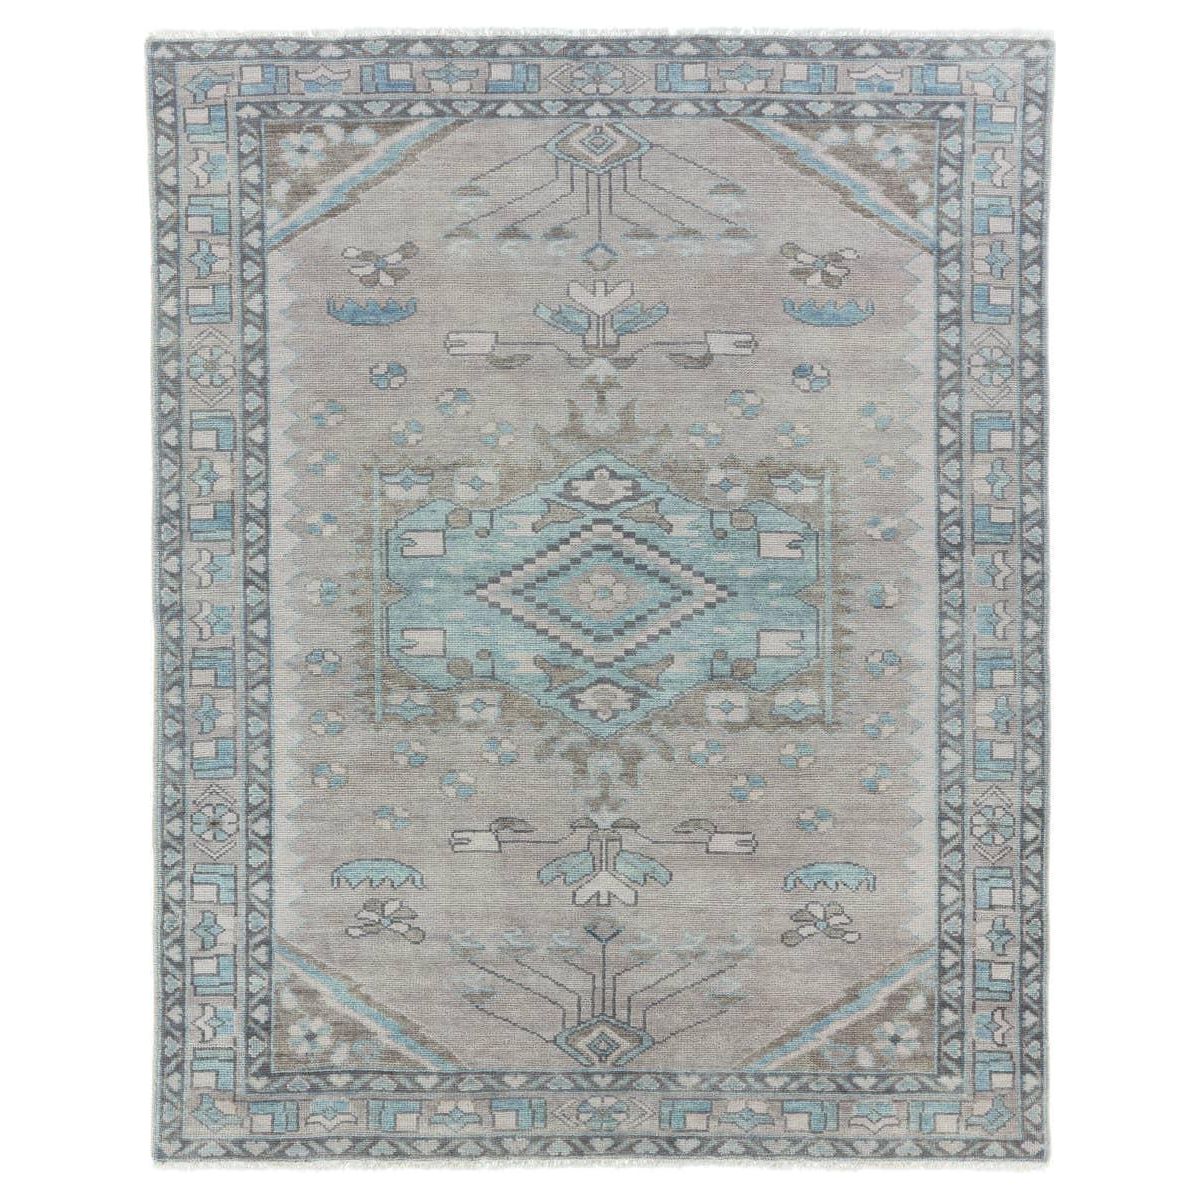 The Salinas Santita is punctuated by both vibrant and neutral hues and combined with intricate details, lending a stunning transitional look to any home. The Santita rug makes a moody statement with grounding hues and a tribal, medallion motifs. This durable, artisan-made rug features geometric accents in a serene gray, blue, and taupe colorway. Amethyst Home provides interior design, new home construction design consulting, vintage area rugs, and lighting in the Newport Beach metro area.